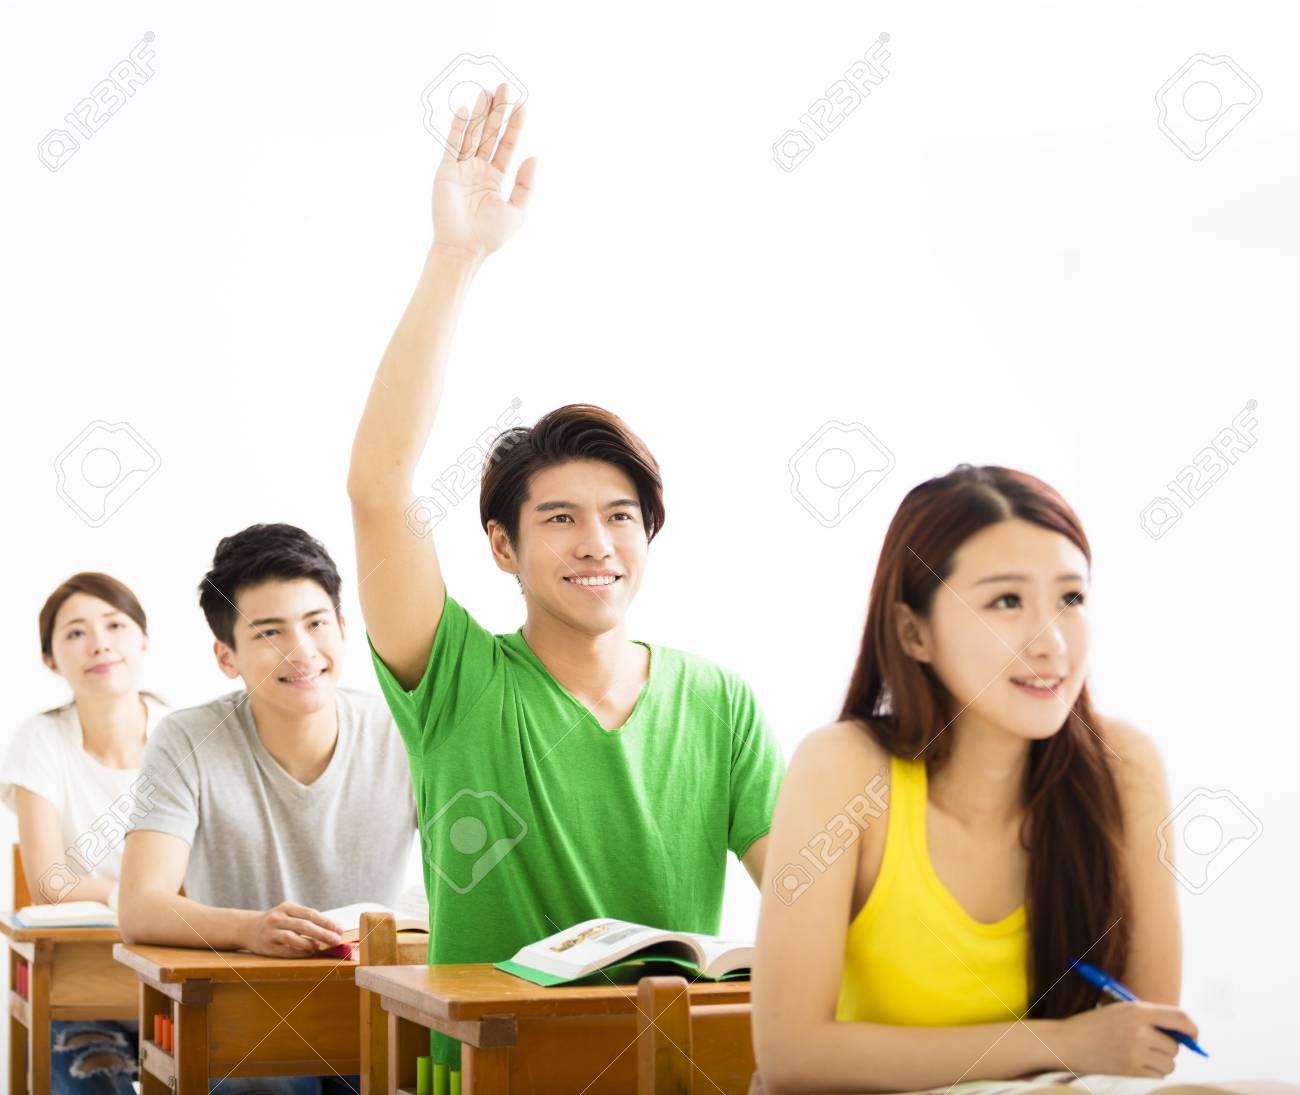 56782675-college-student-raise-hand-for-question-in-classroom.jpg